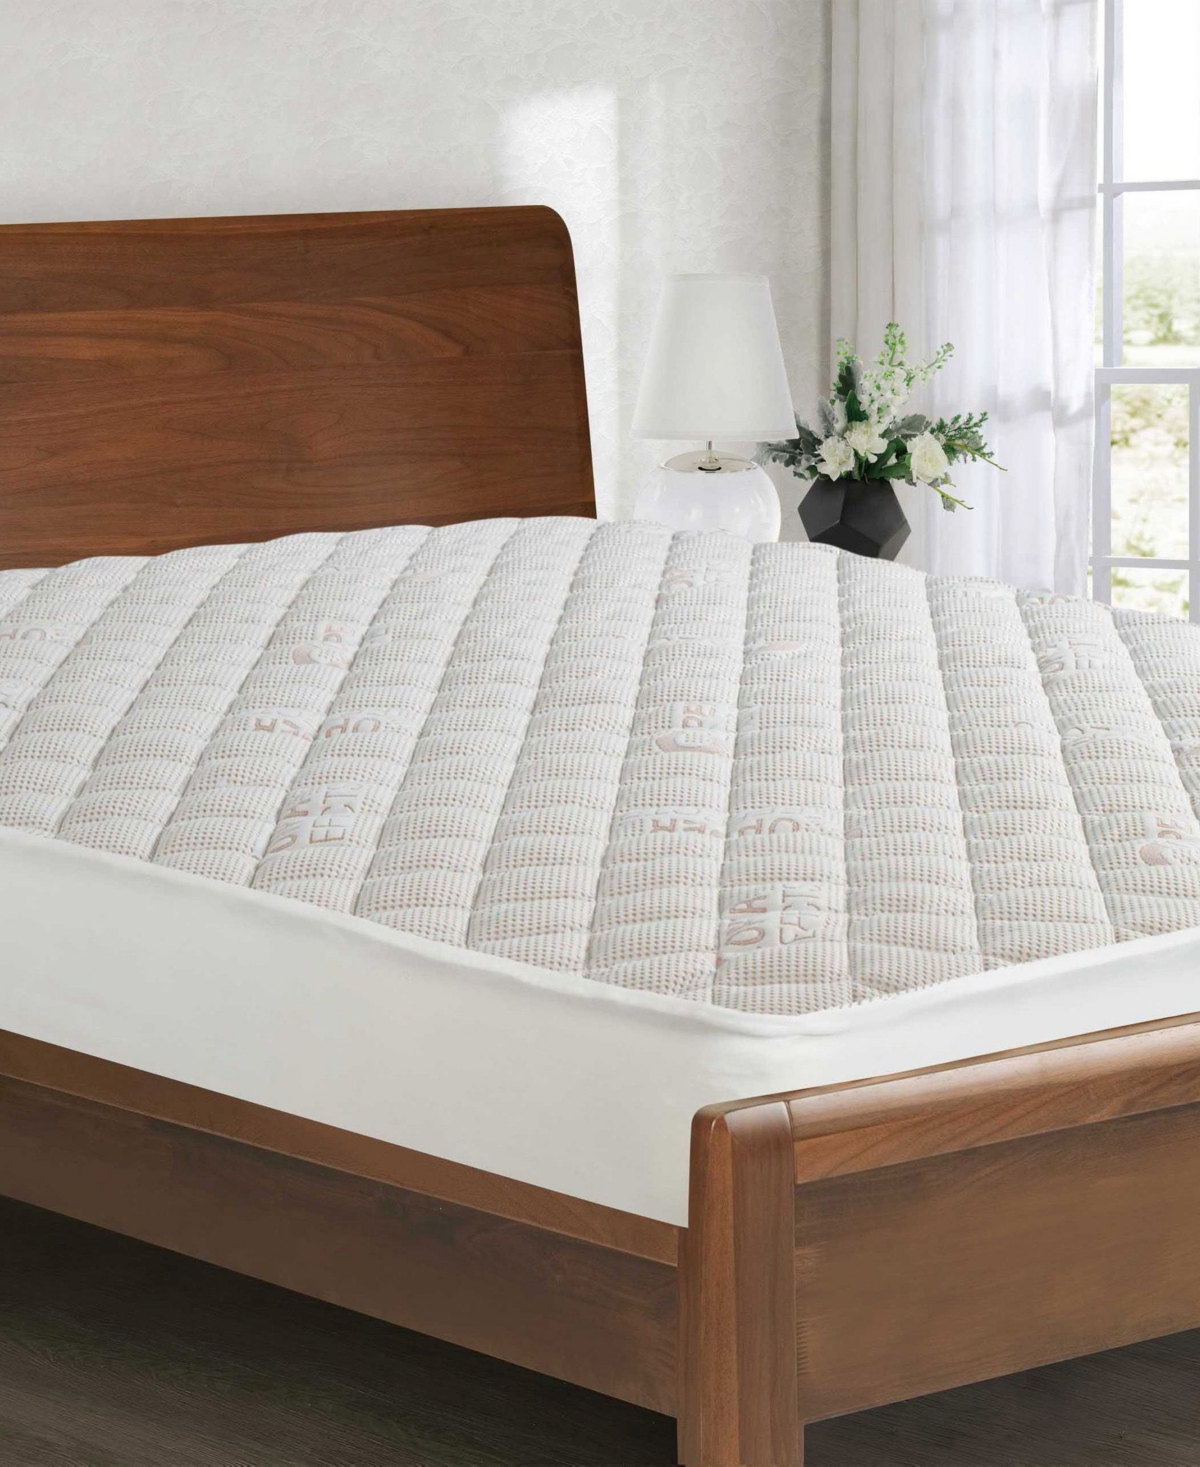 All-In-One Copper effects Fitted Mattress Pad, King